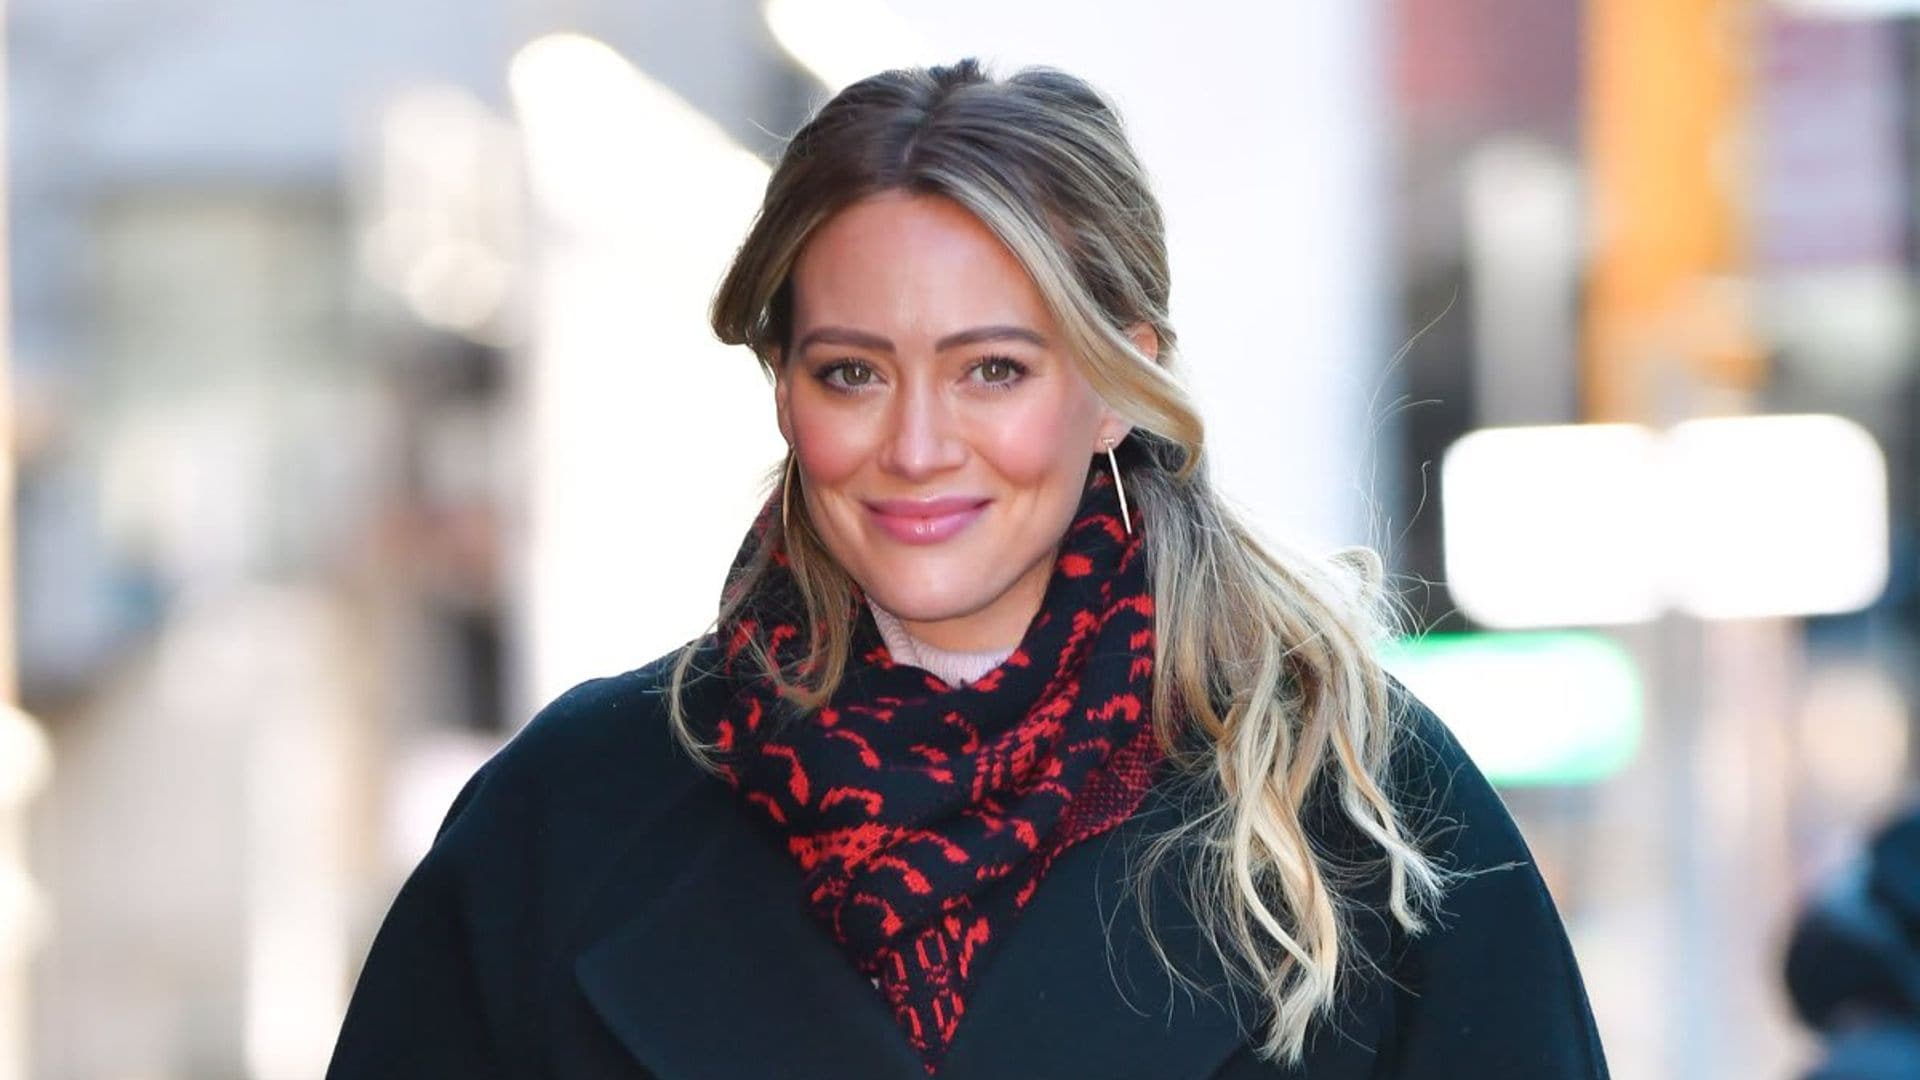 Hilary Duff contracts the Delta variant of COVID-19, here are her symptoms